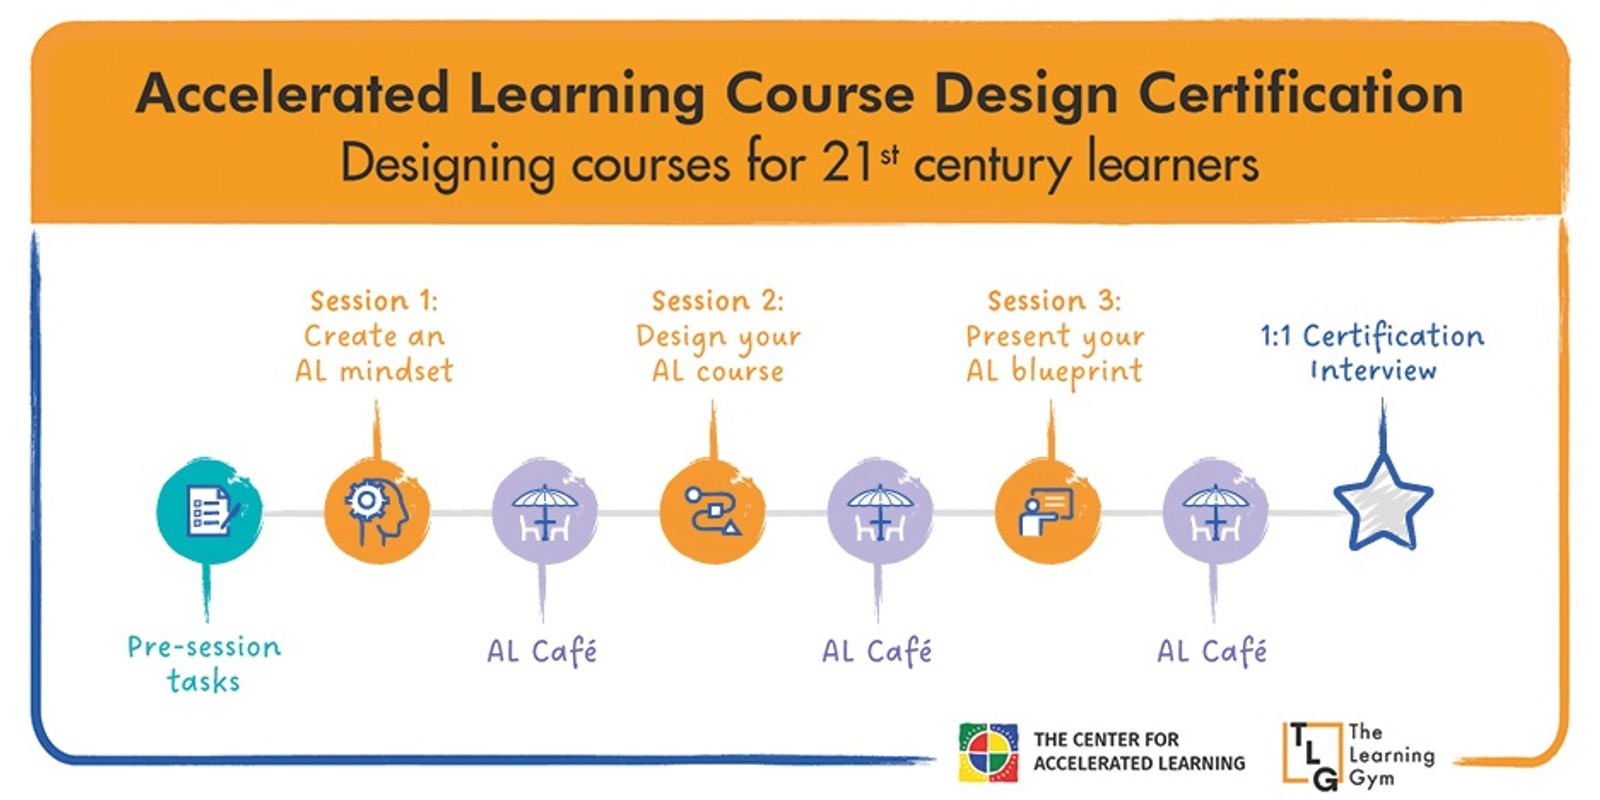 Accelerated Learning Course Design Certiﬁcation | Designing courses for 21st century learners